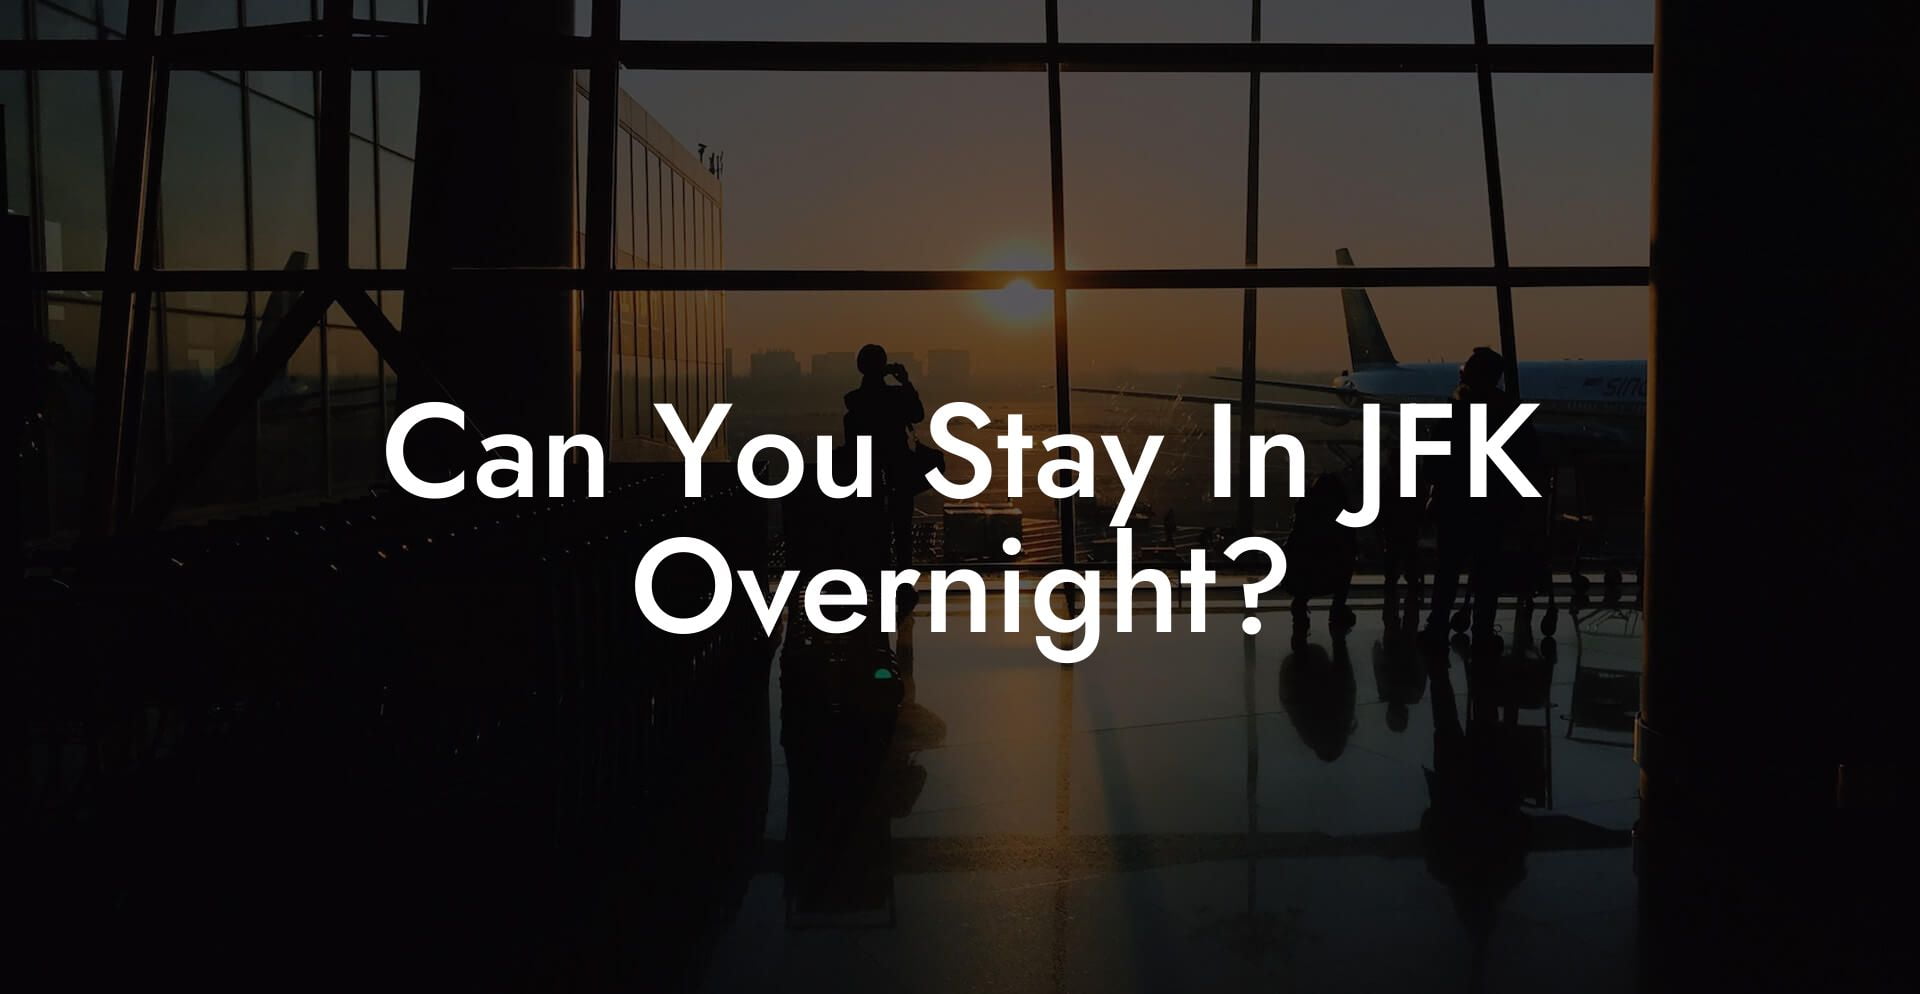 Can You Stay In JFK Overnight?